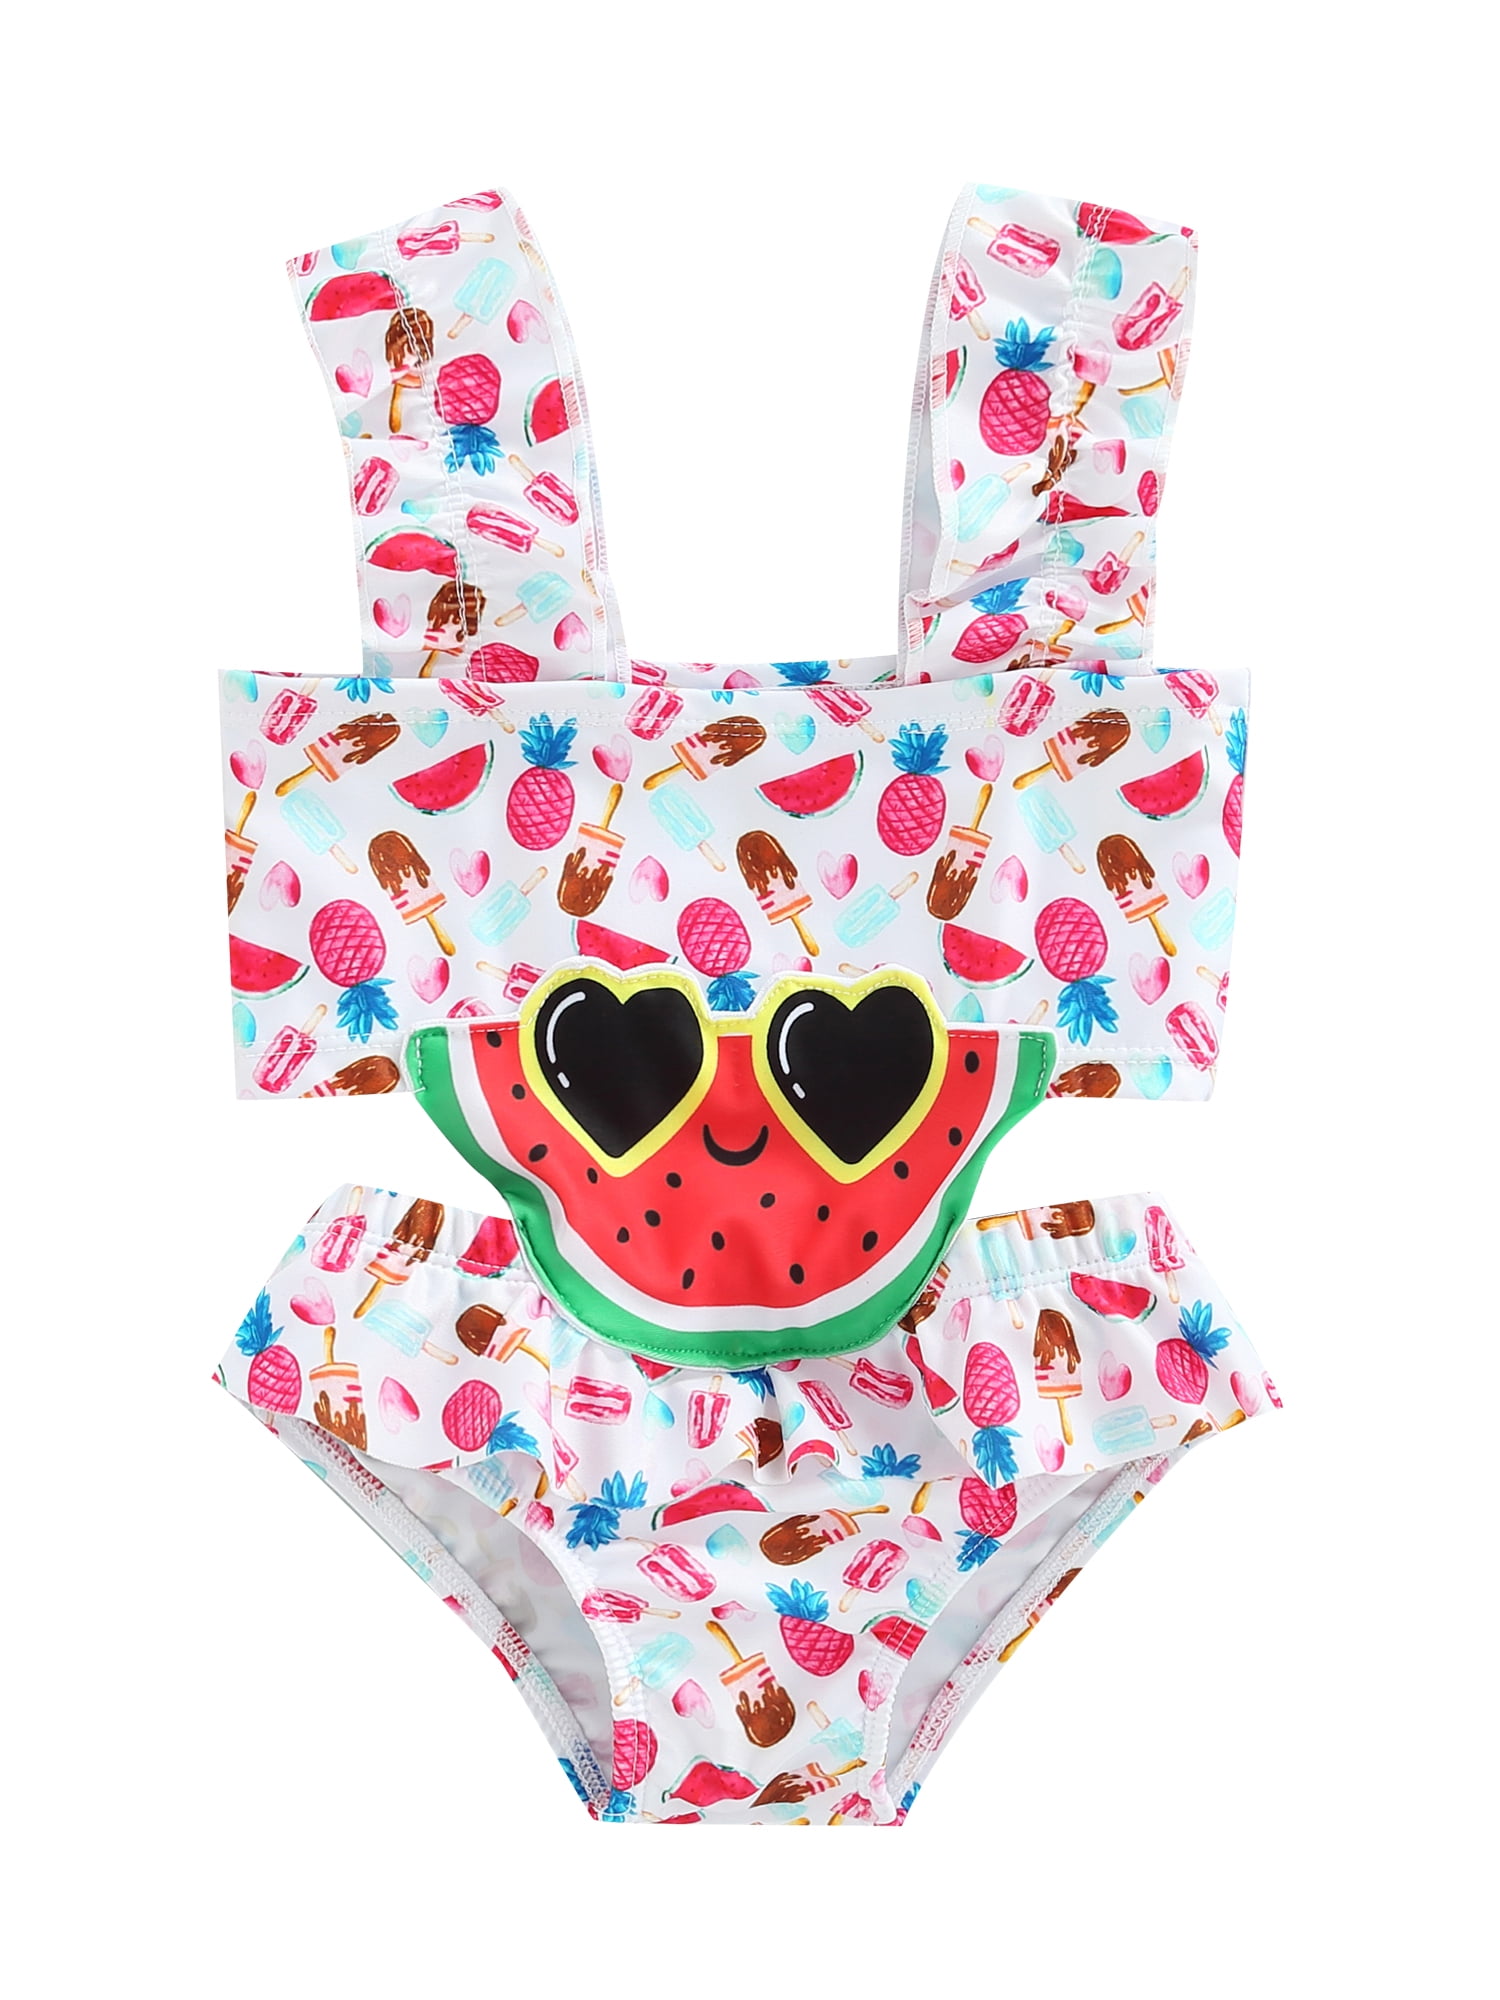 TheFound Toddler Baby Girl One-Piece Swimsuit 2T 3T 4T 5T Kids Bathing ...